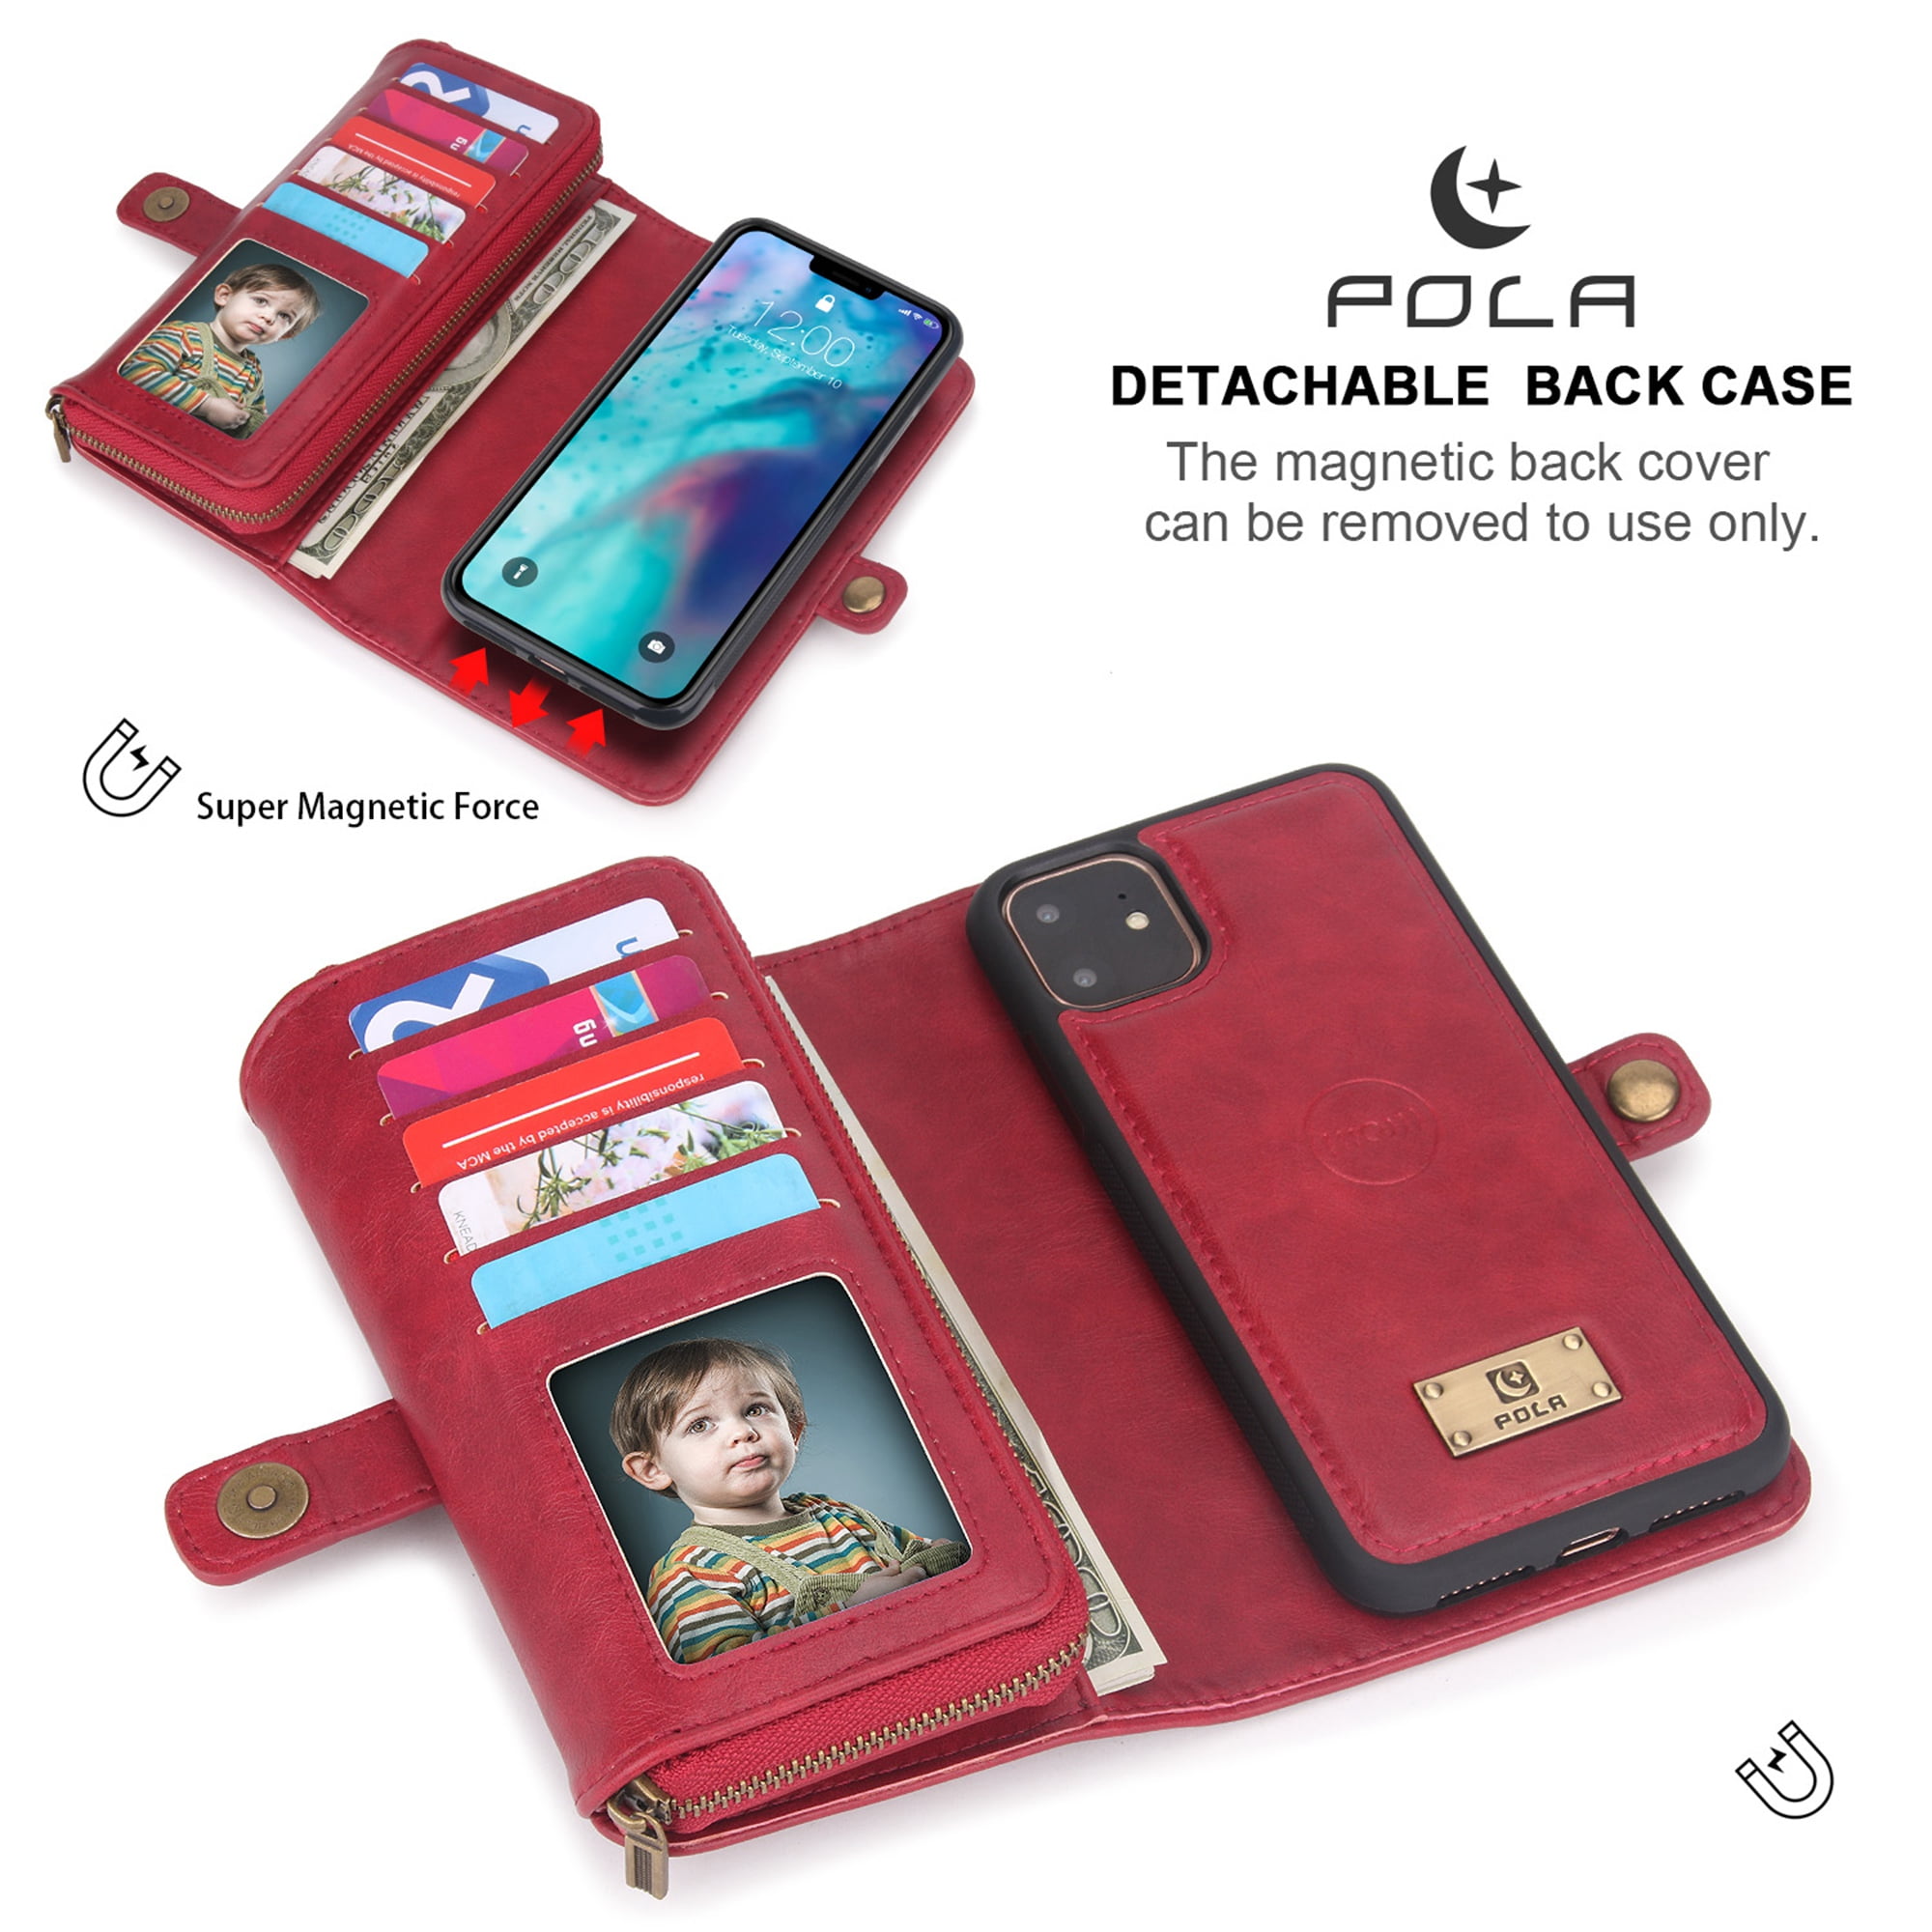 Multi-function Detachable Wallet Leather Phone Case For Iphone 11